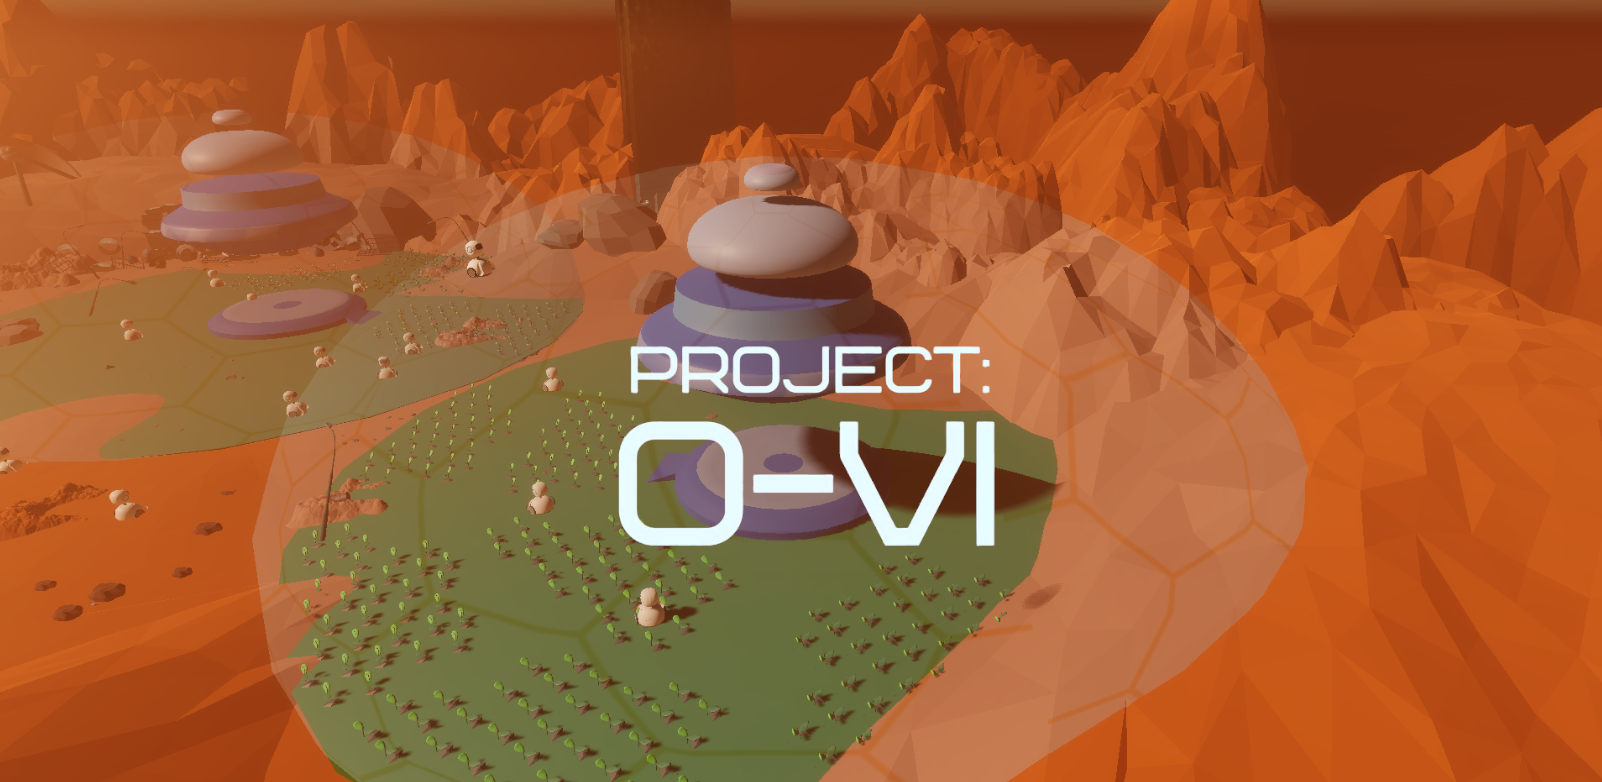 Projects: O-VI